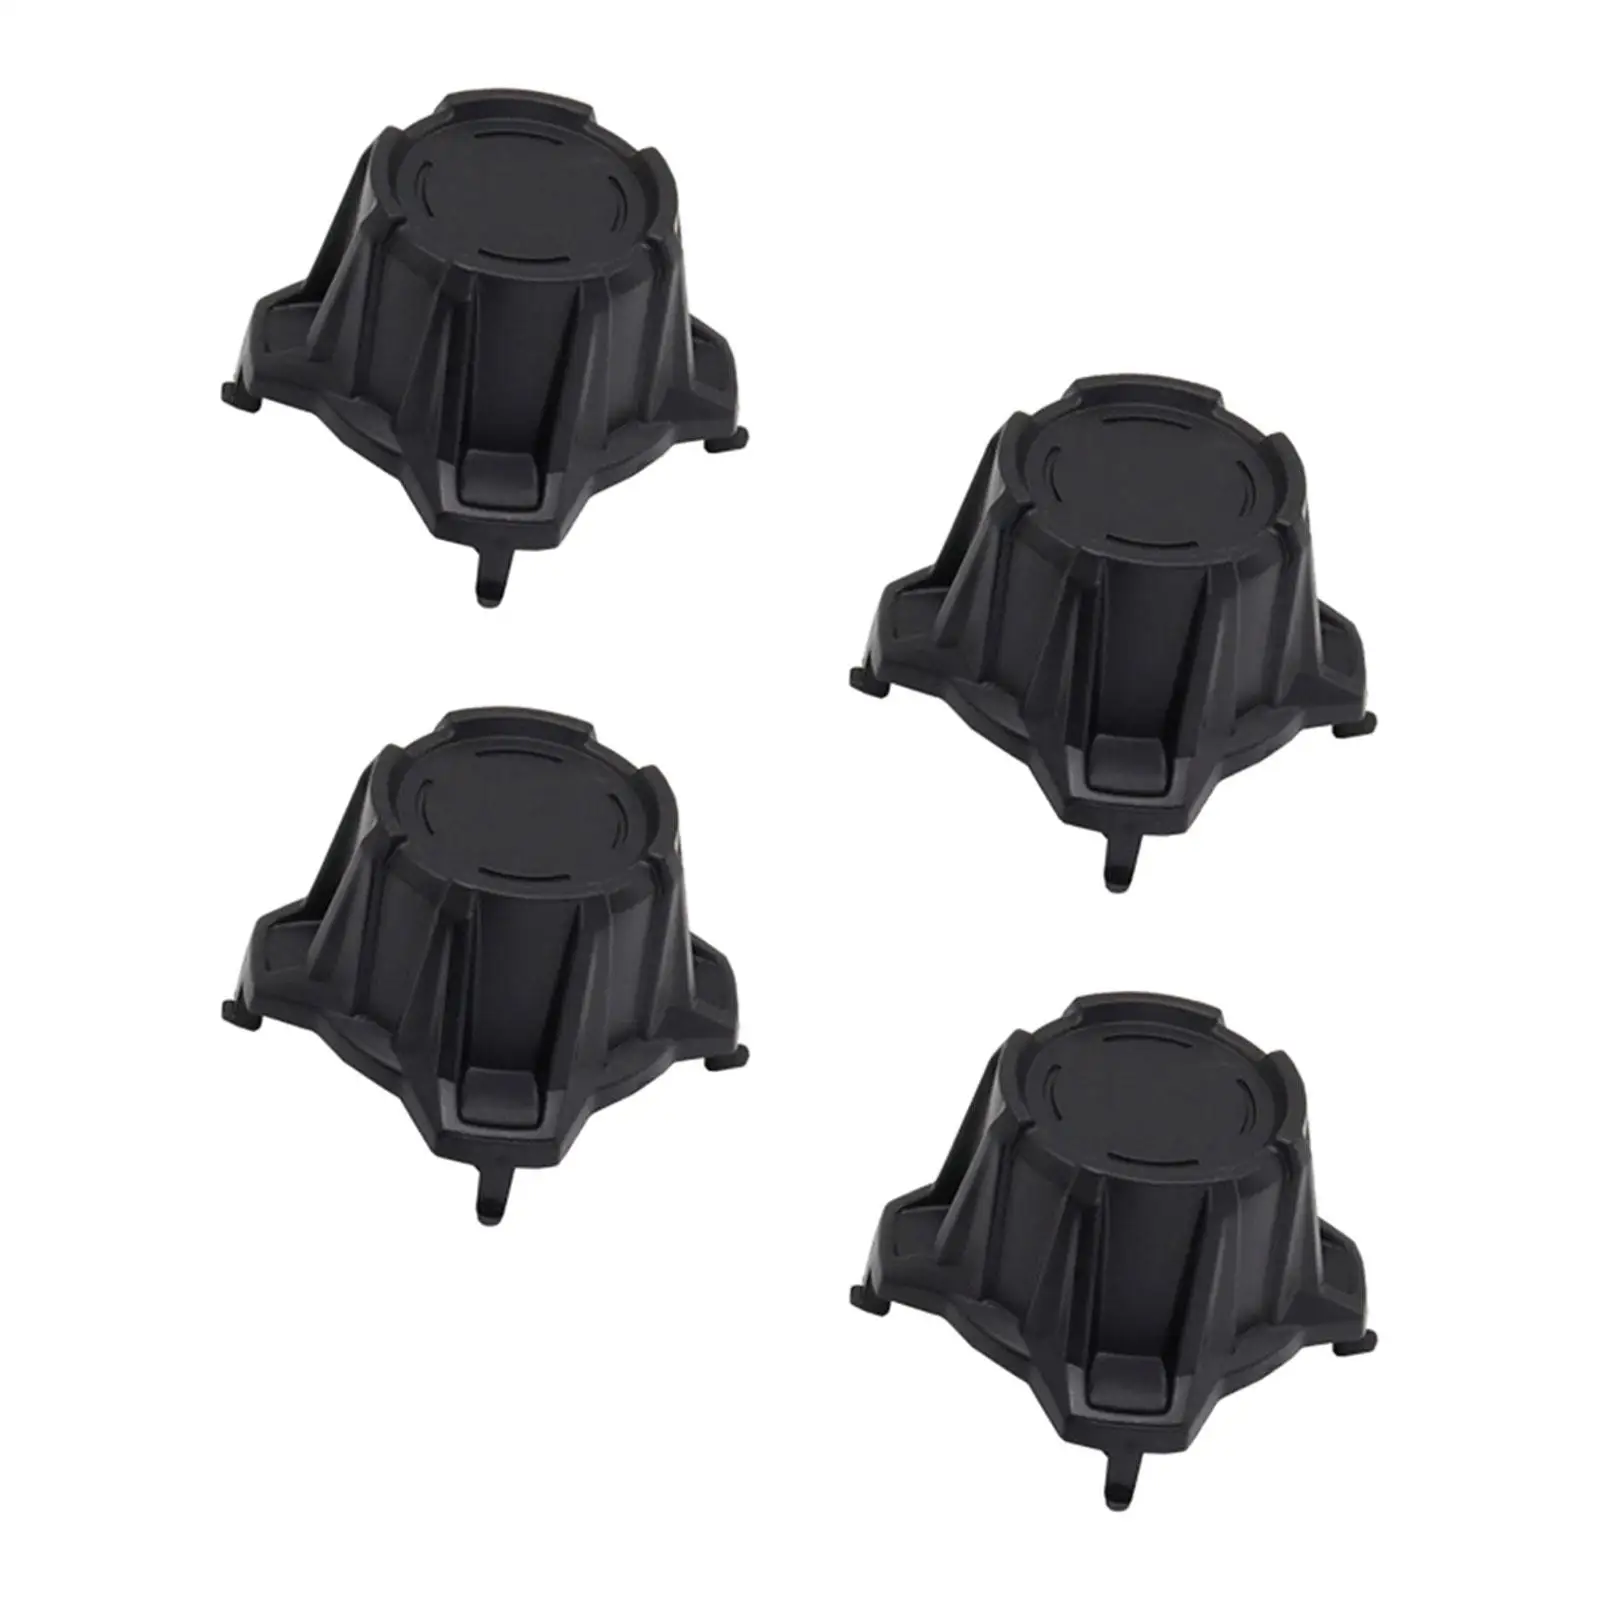 4x Wheel Center Hub Caps Motorcycle Easy Installation Cap Cover for x3 2017-2020 Professional Easily Install Repair Parts